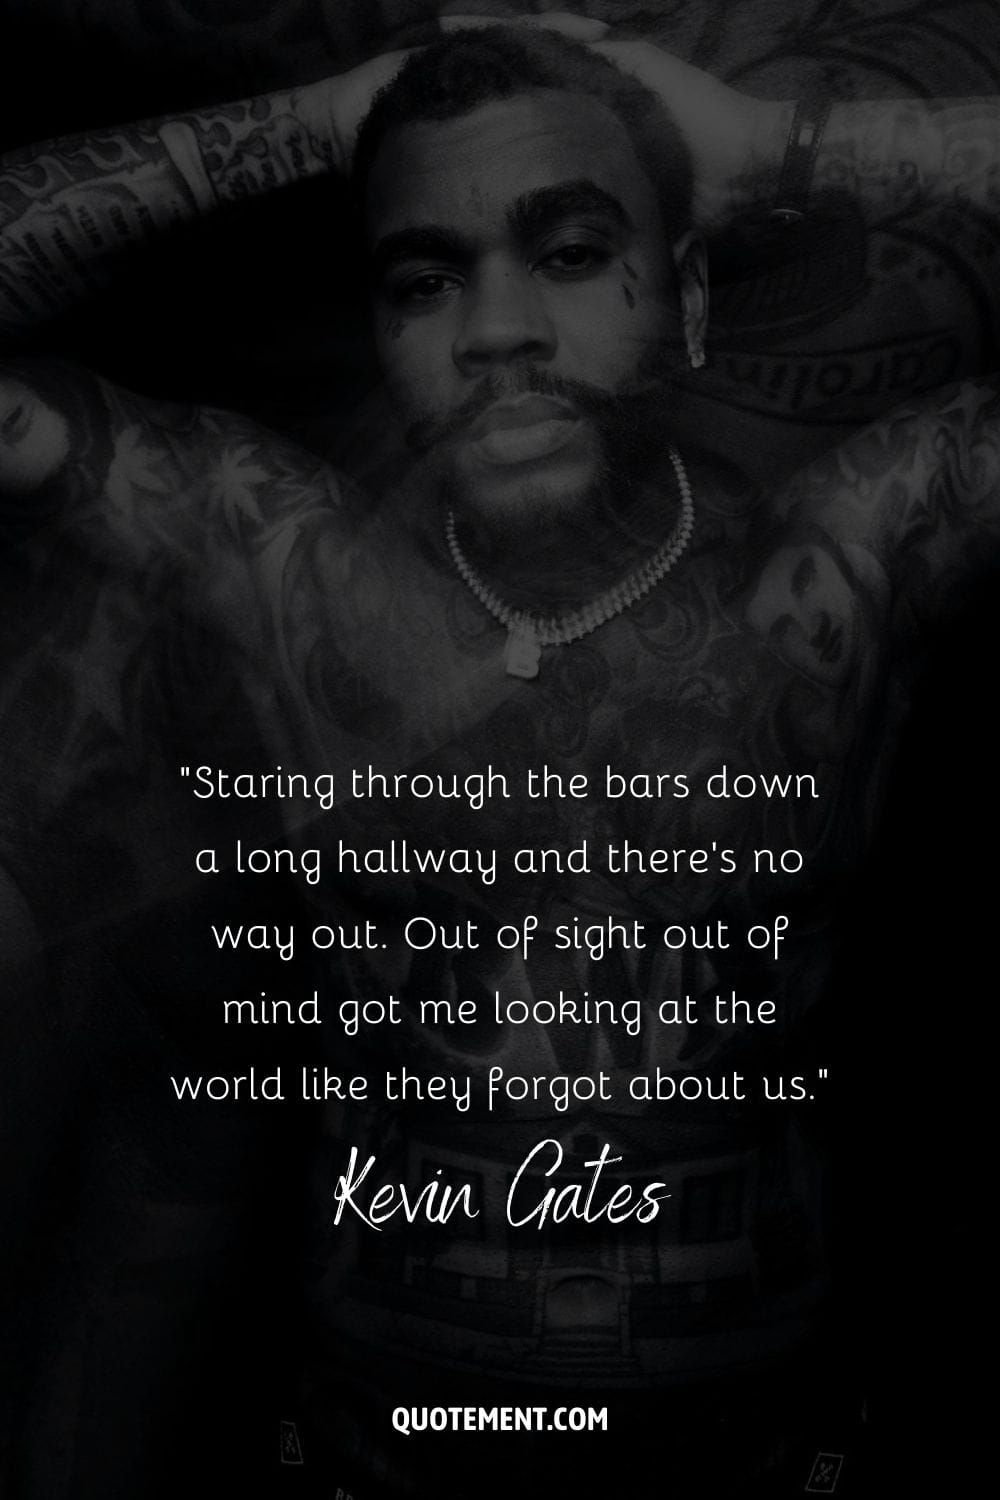 “Staring through the bars down a long hallway and there's no way out. Out of sight out of mind got me looking at the world like they forgot about us.” – Kevin Gates